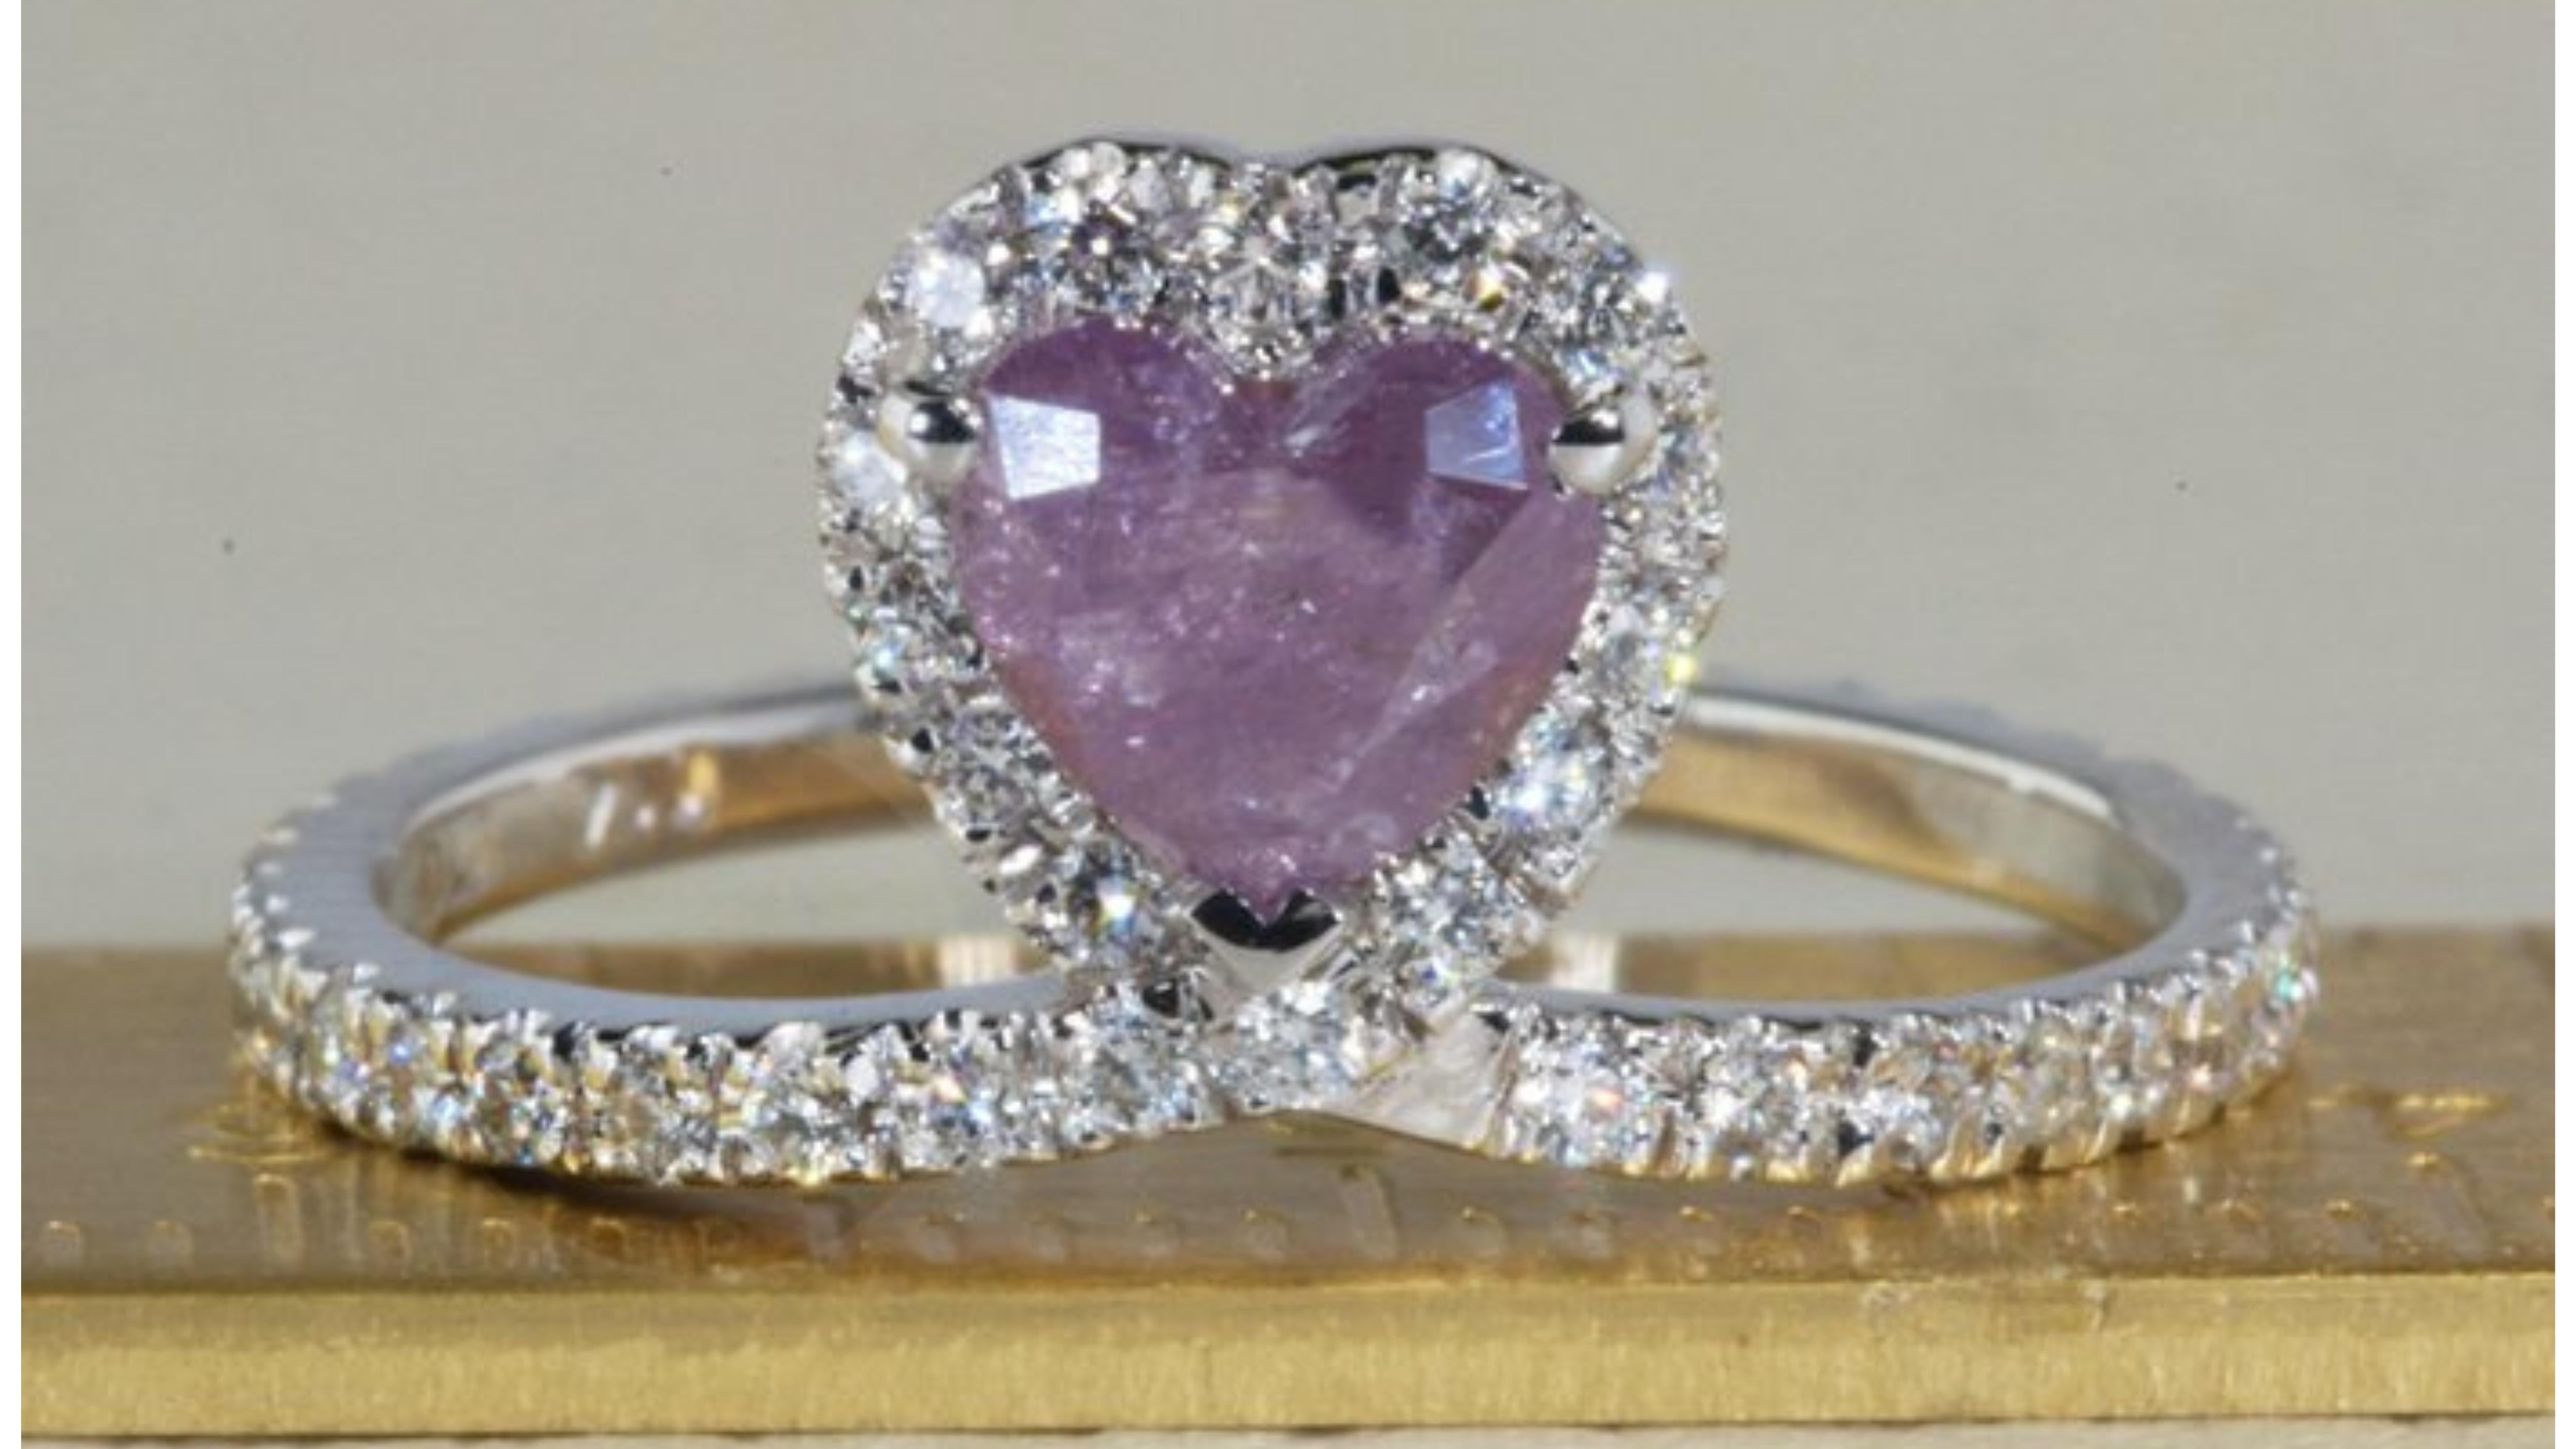 Very Rare purple heart diamond mounted in a white gold 18k Ring with ideal round brilliant diamonds around the purple heart in a total weight of 1.06 carat

Product Details: 

Metal: 18k White Gold

Main stone: 1 Pc Heart Diamond
Colour: